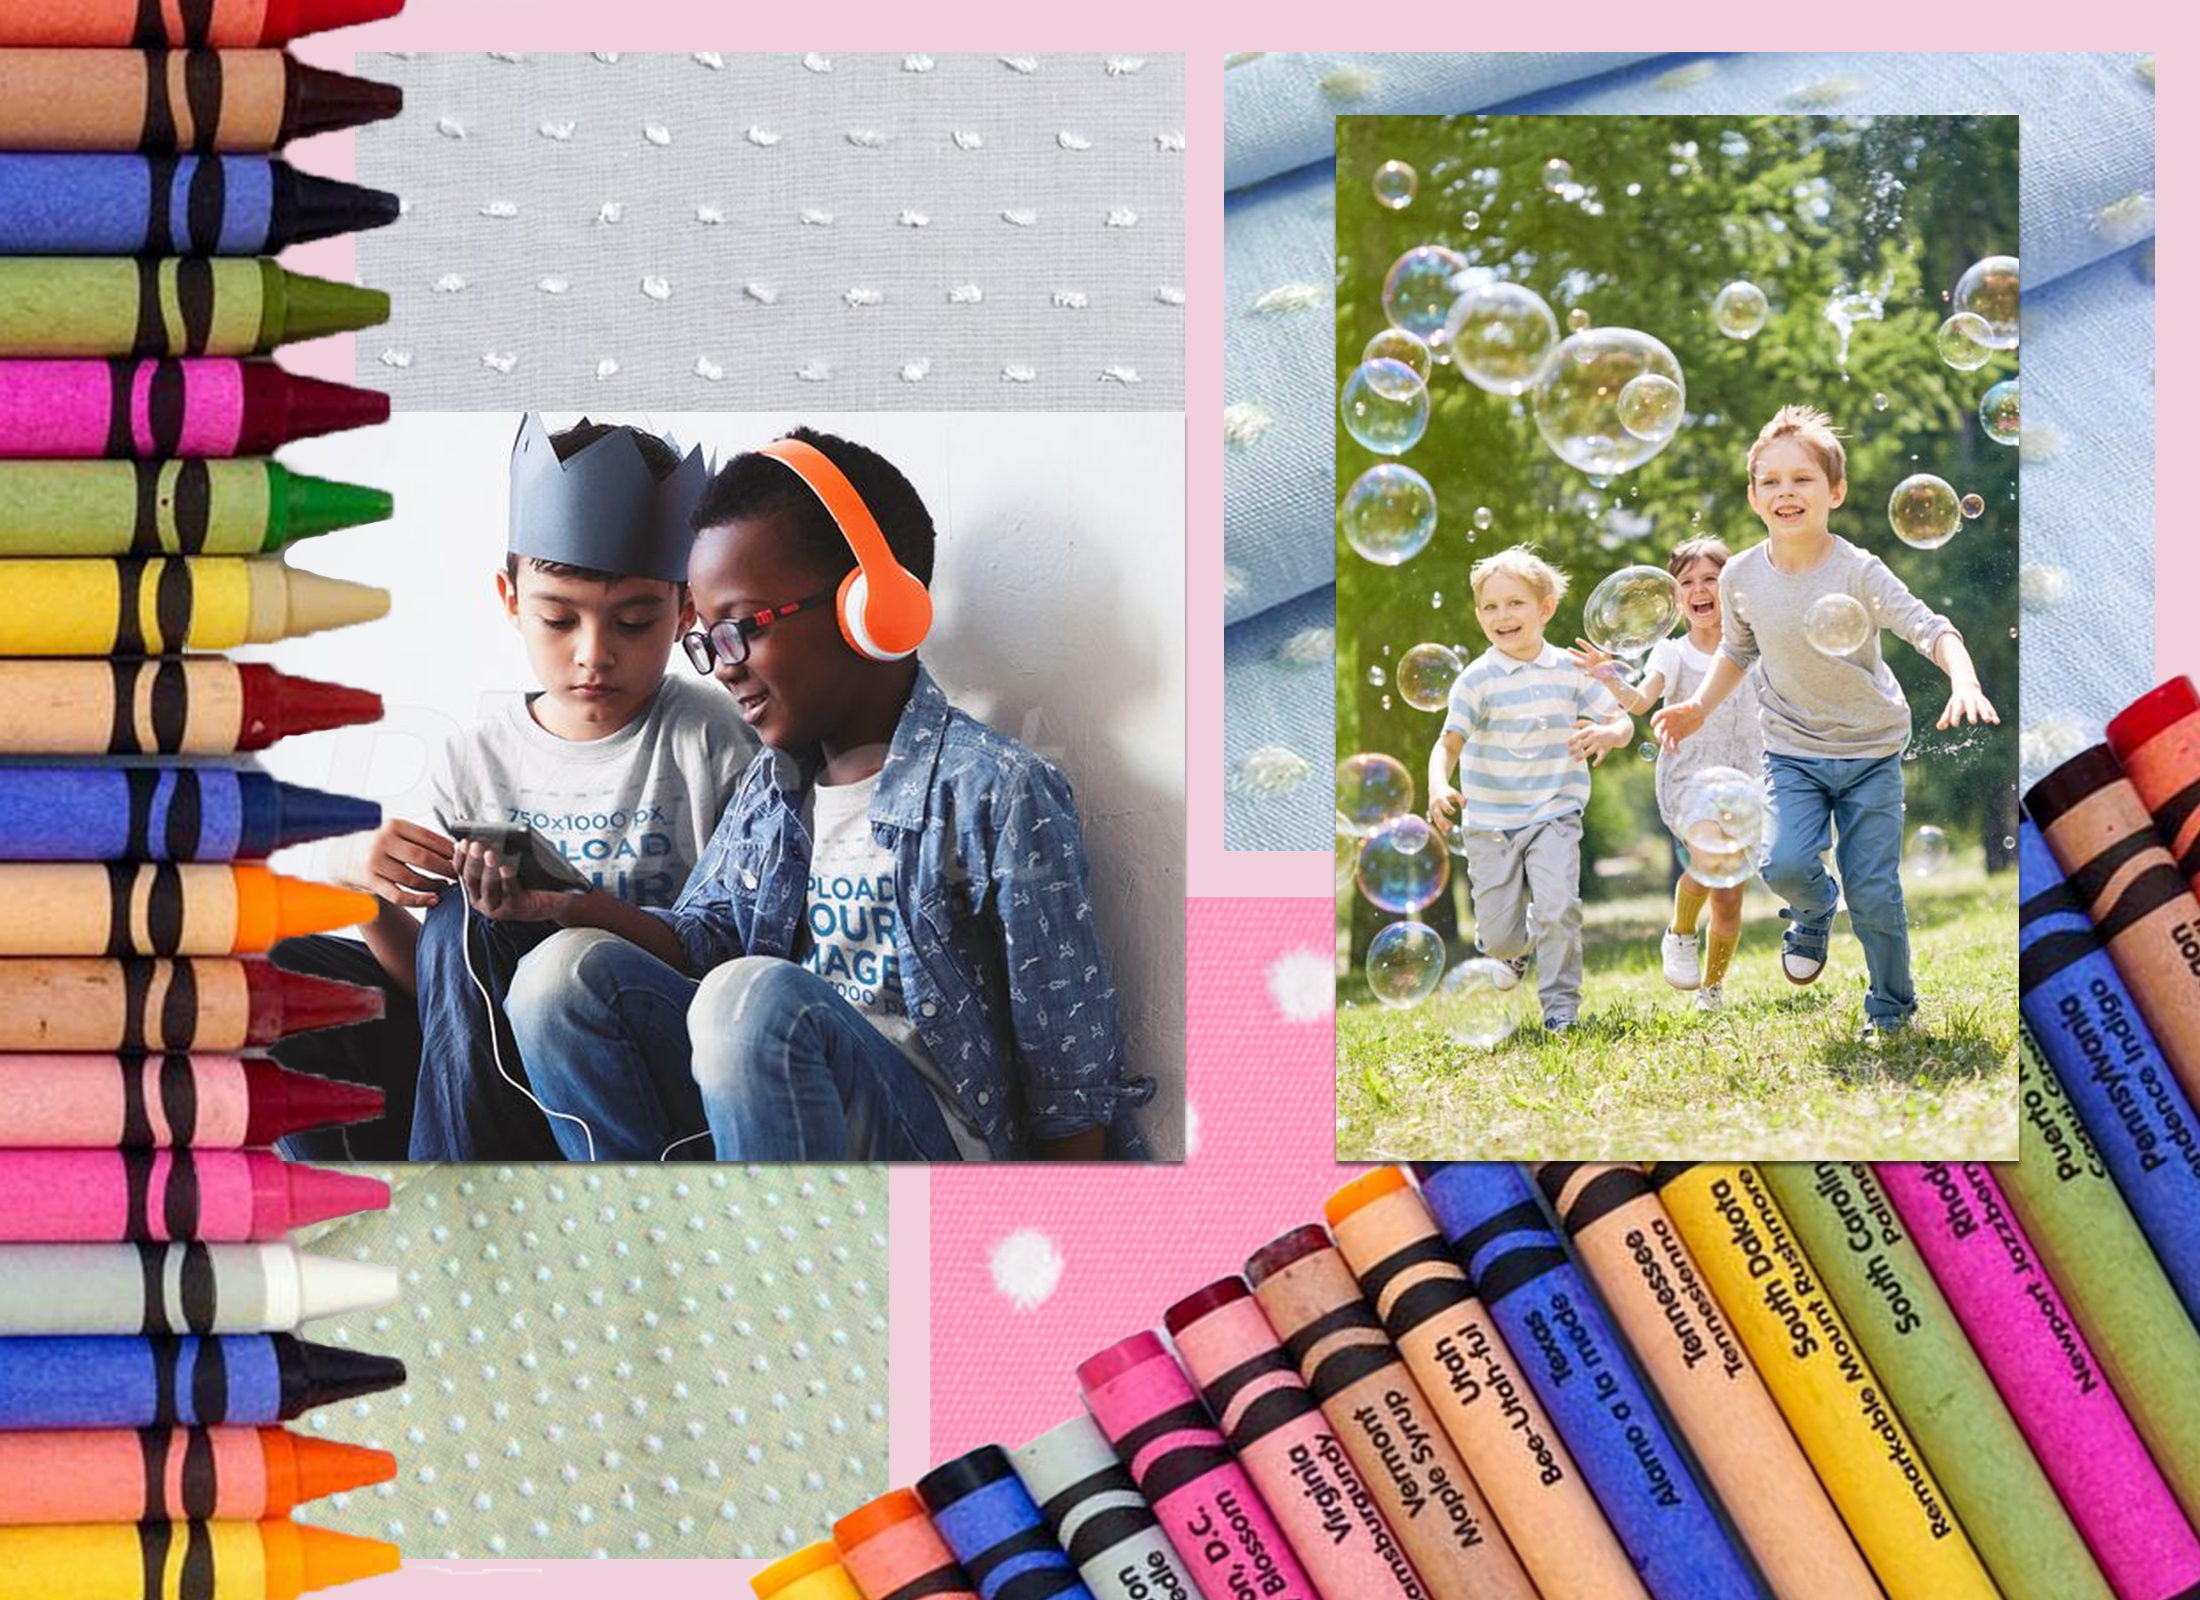 Photos of children playing are framed by transparent images of crayons in the foreground and colorful fabrics in the background, simulating a "scrapbook-like" feel.